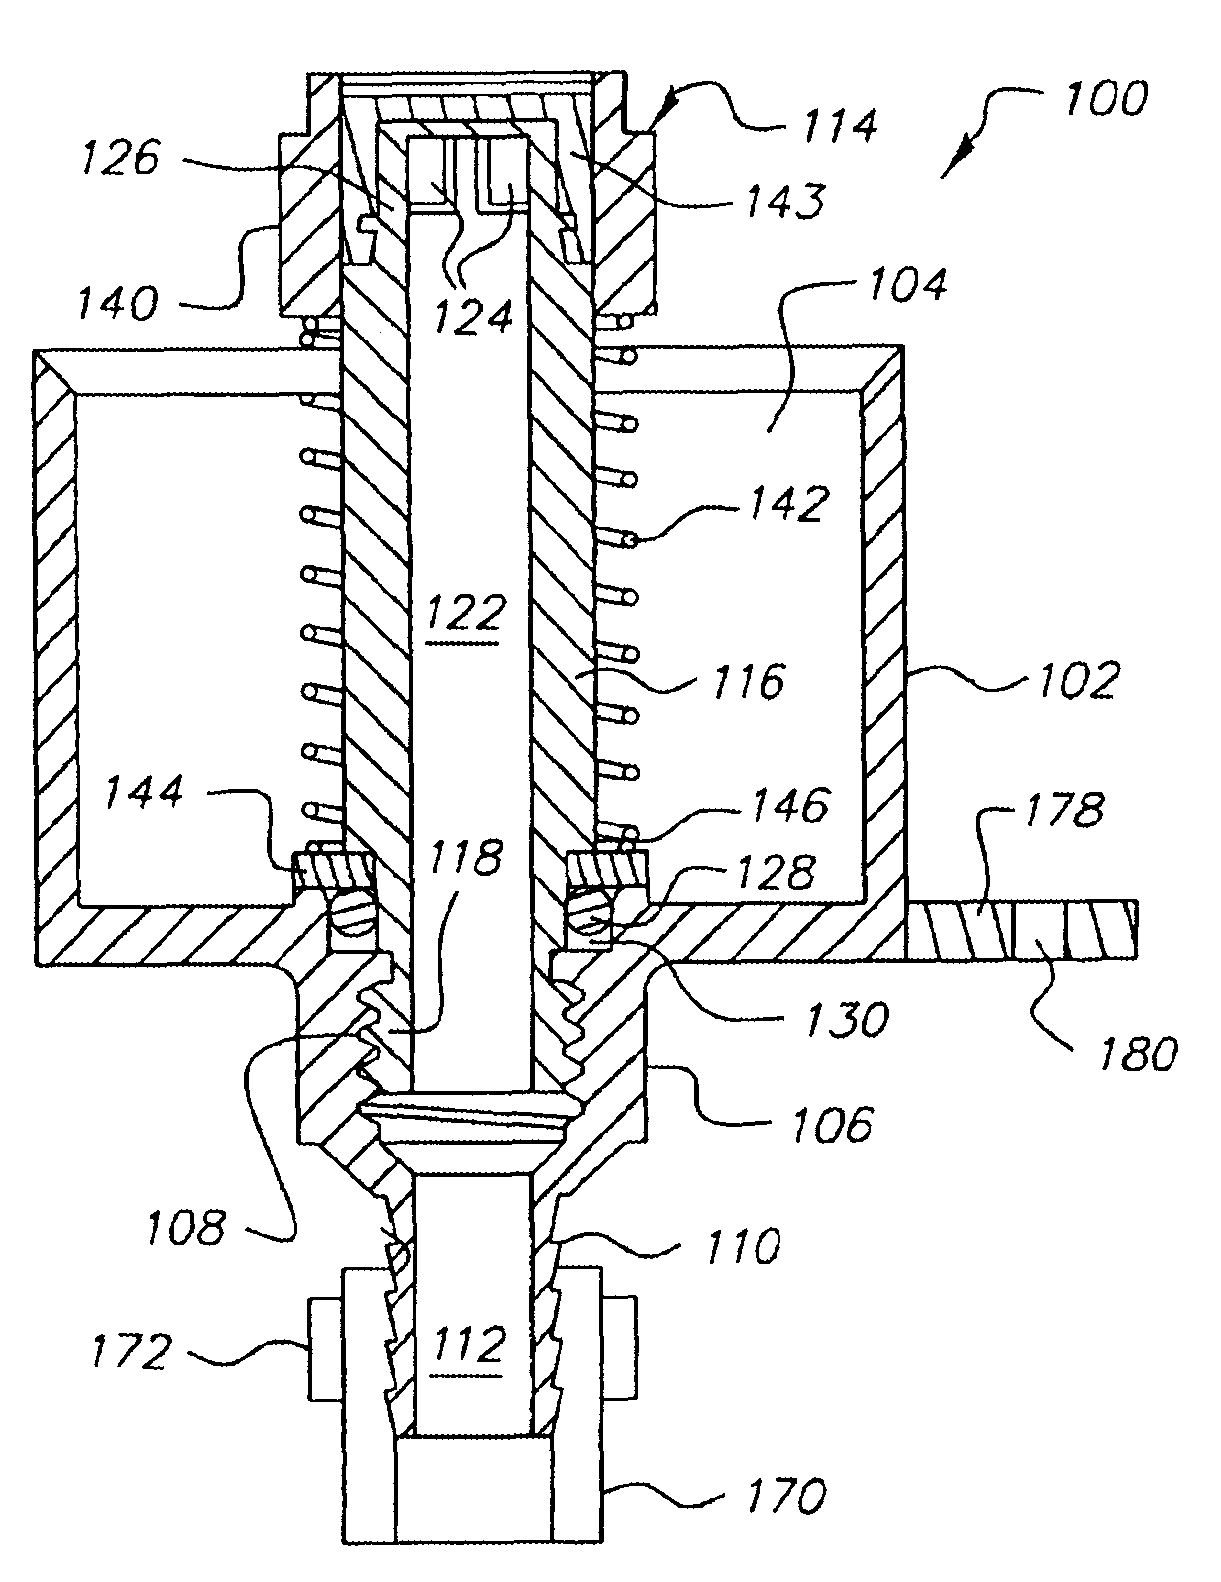 Cup and probe assembly for use in a valve system for transferring a liquid between two sources